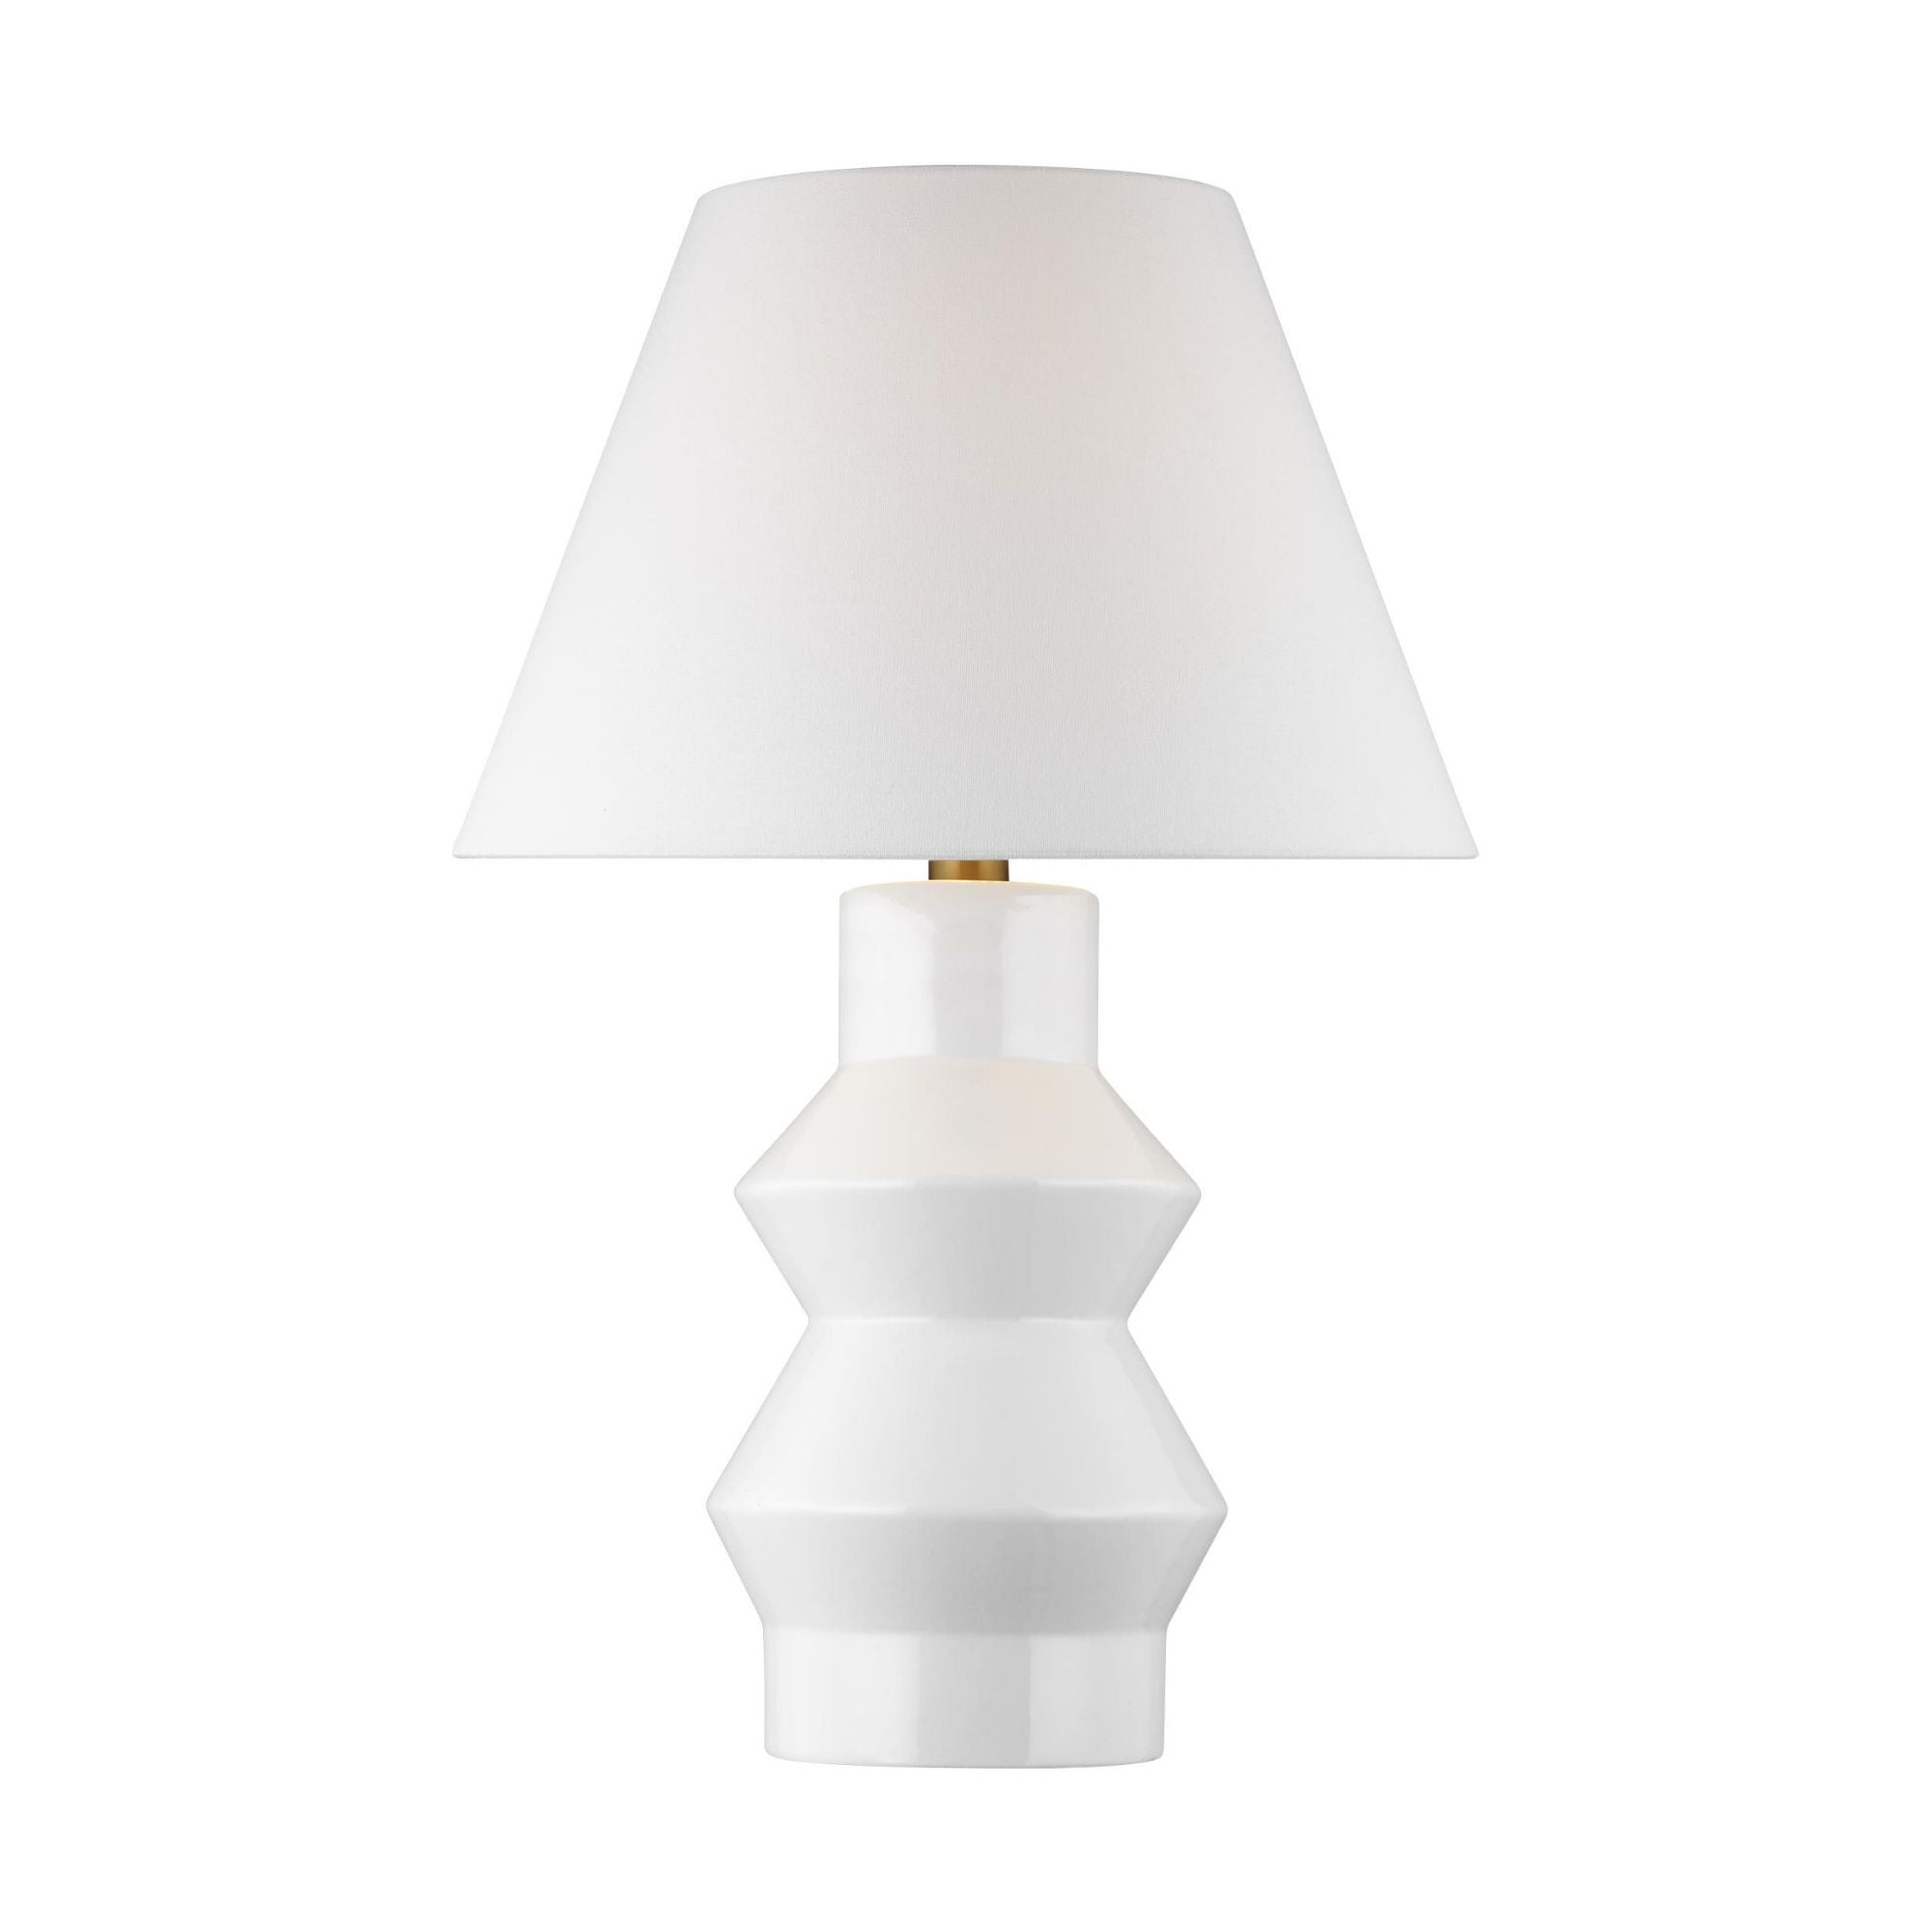 Chapman & Myers Abaco Large Table Lamp in Arctic White